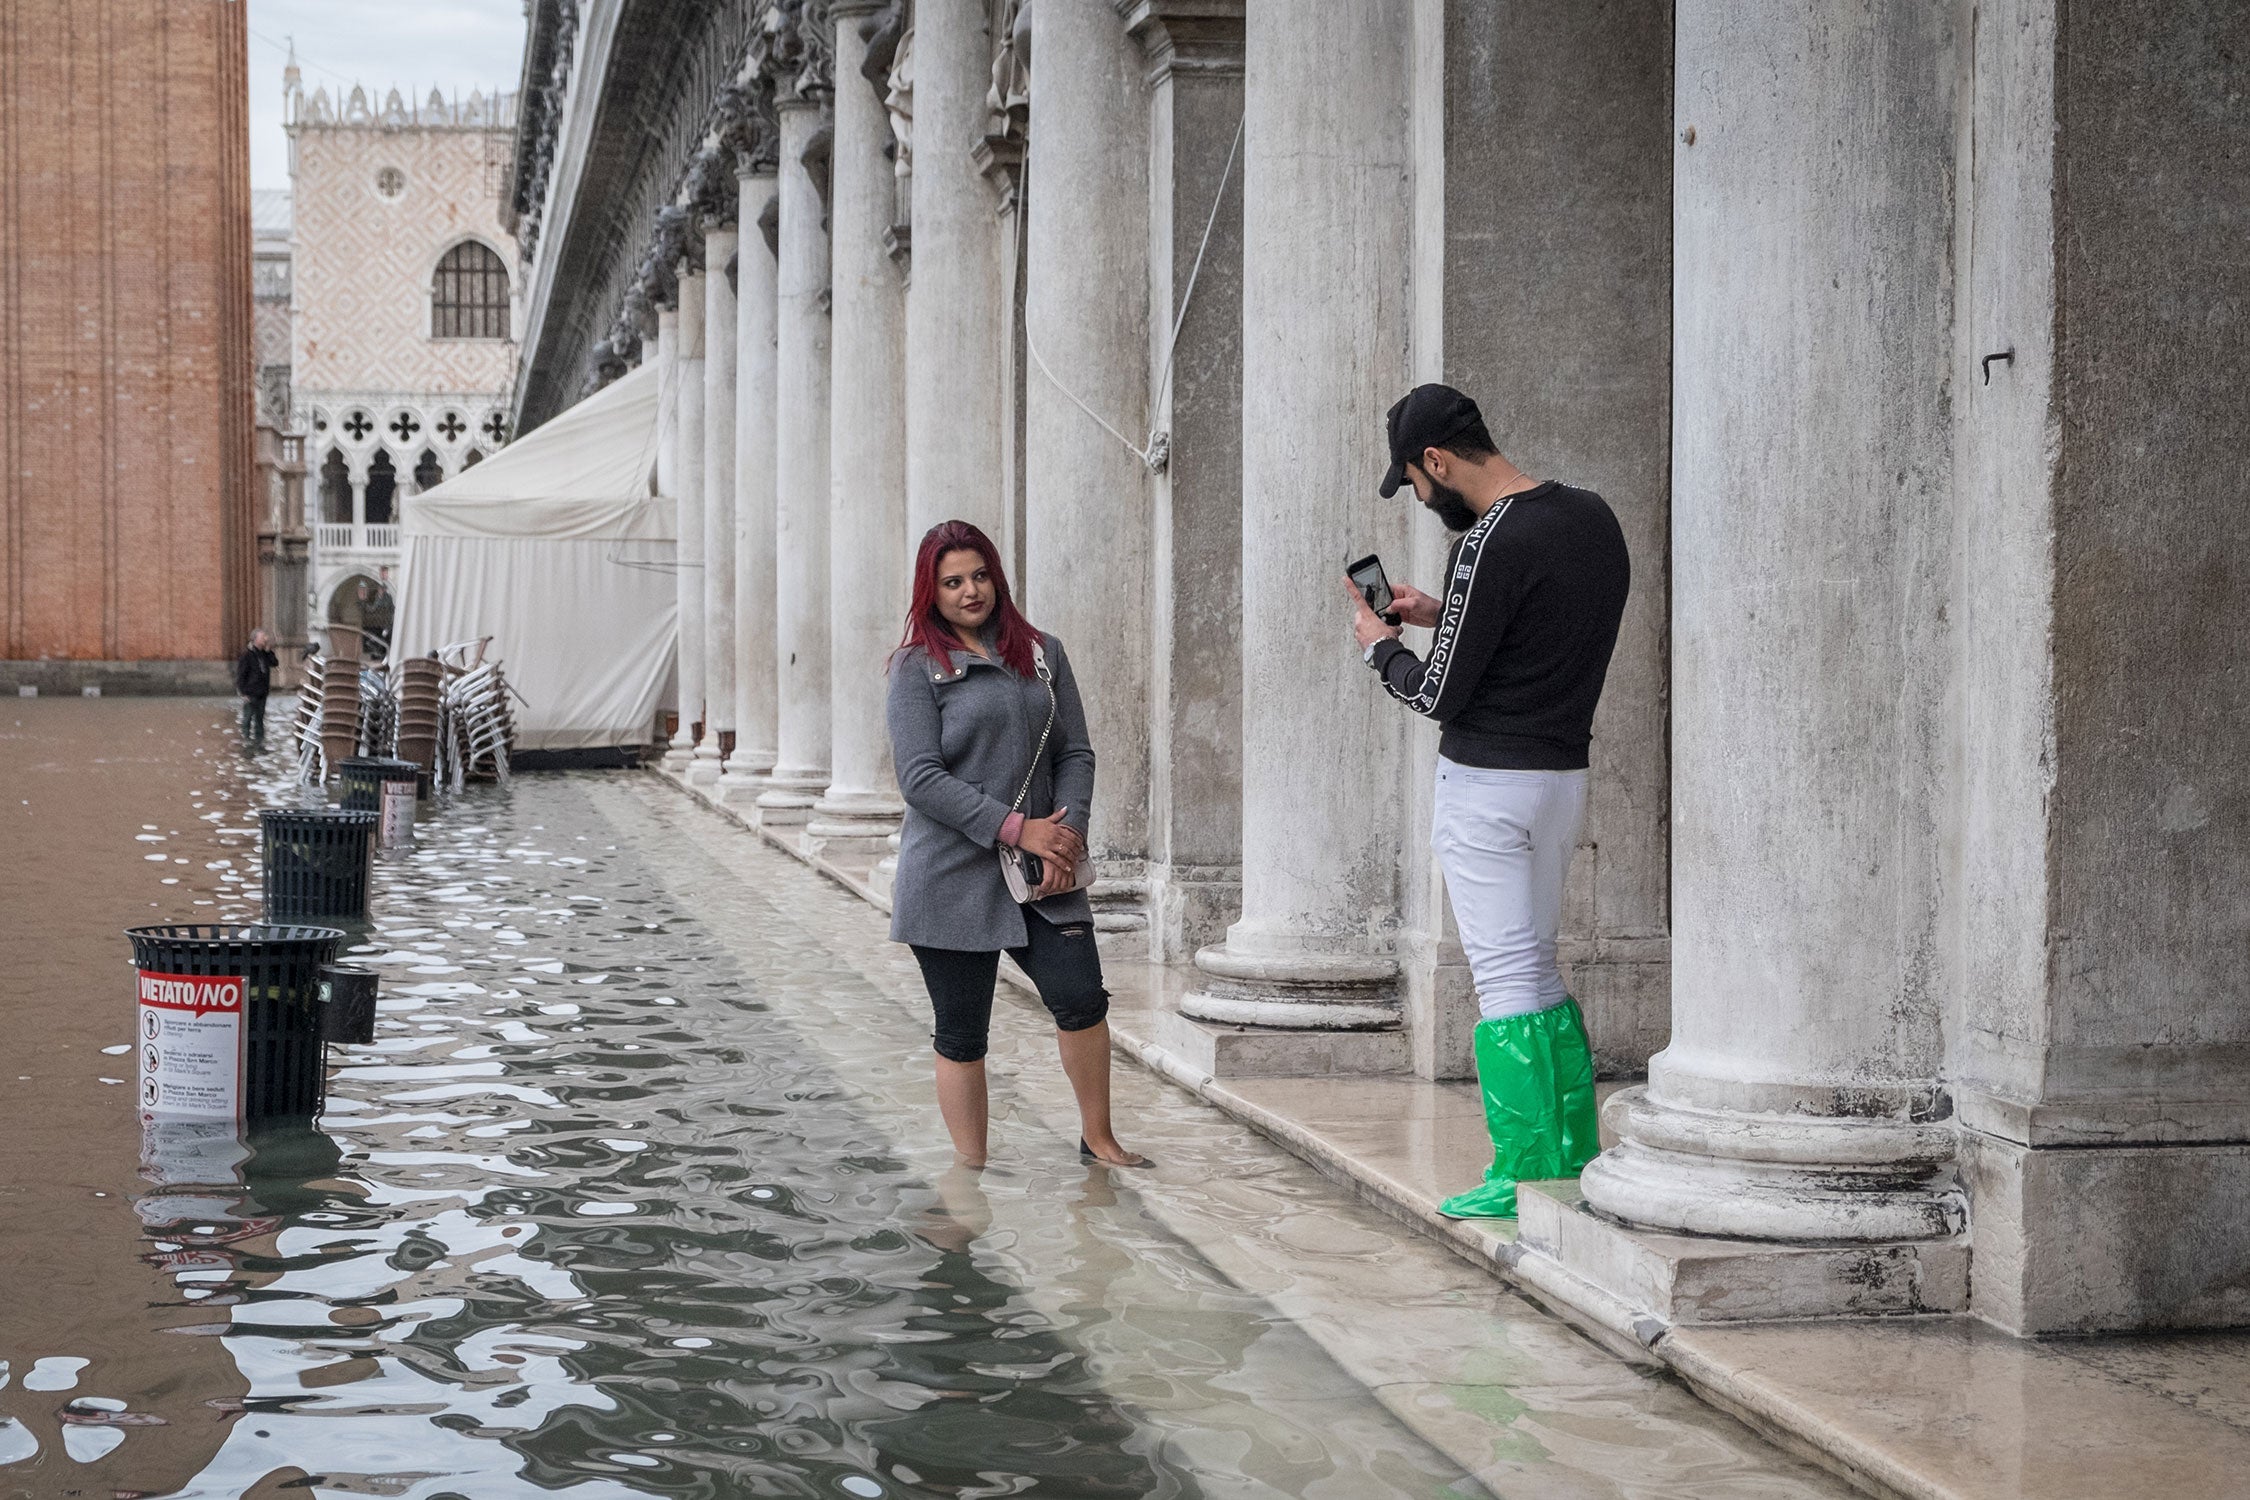 Tourists take pictures in a flooded St. Mark's Square, Nov 17th 2019, Venice.